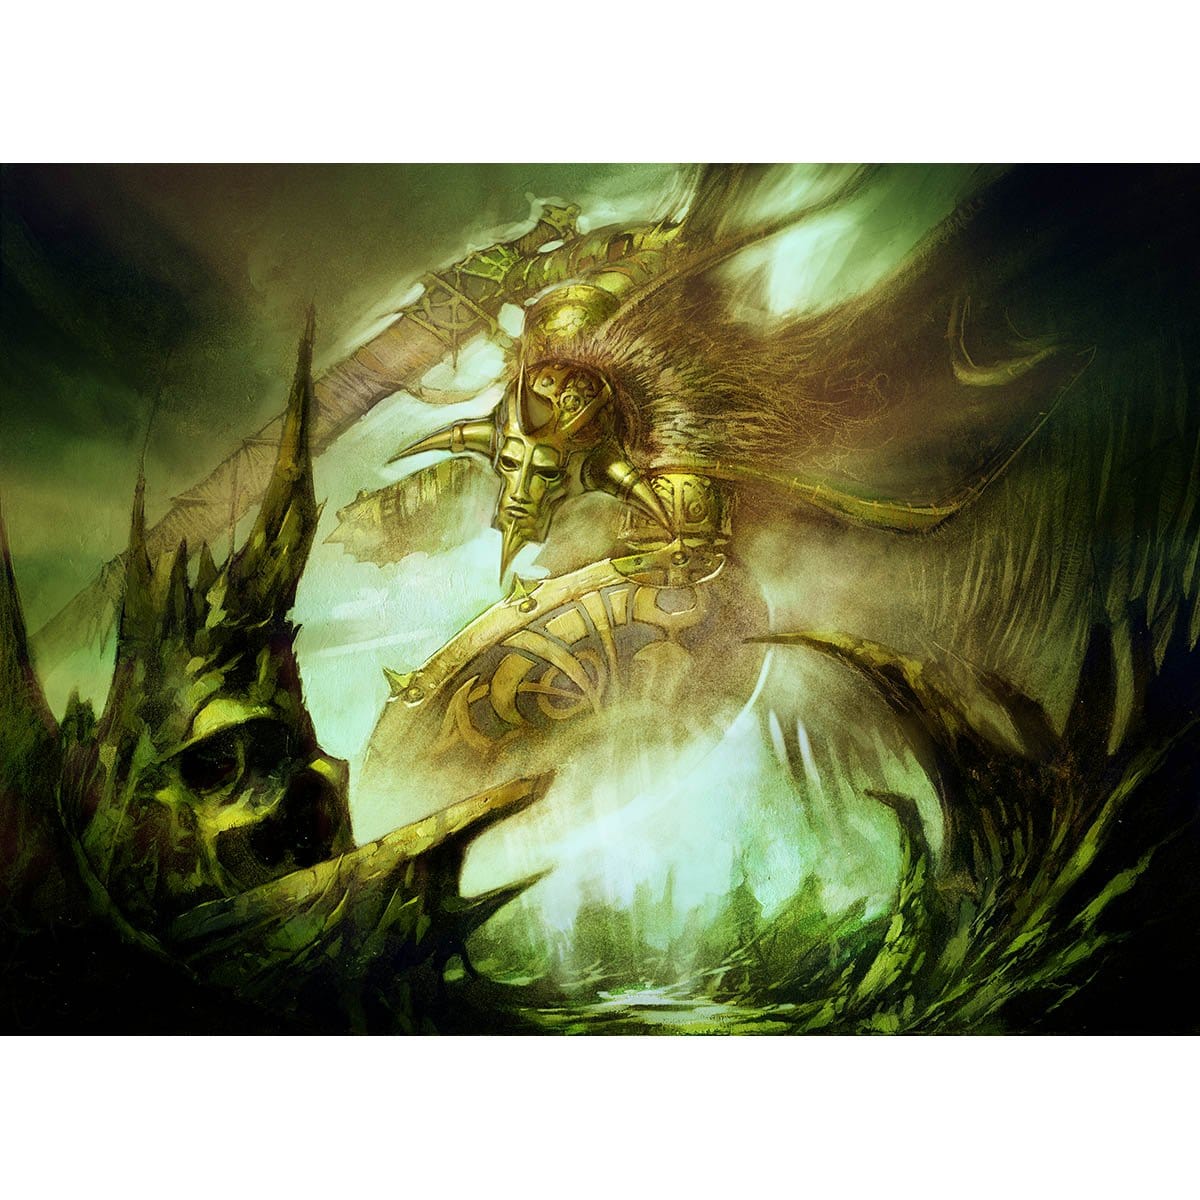 Celestial Crusader Print - Print - Original Magic Art - Accessories for Magic the Gathering and other card games